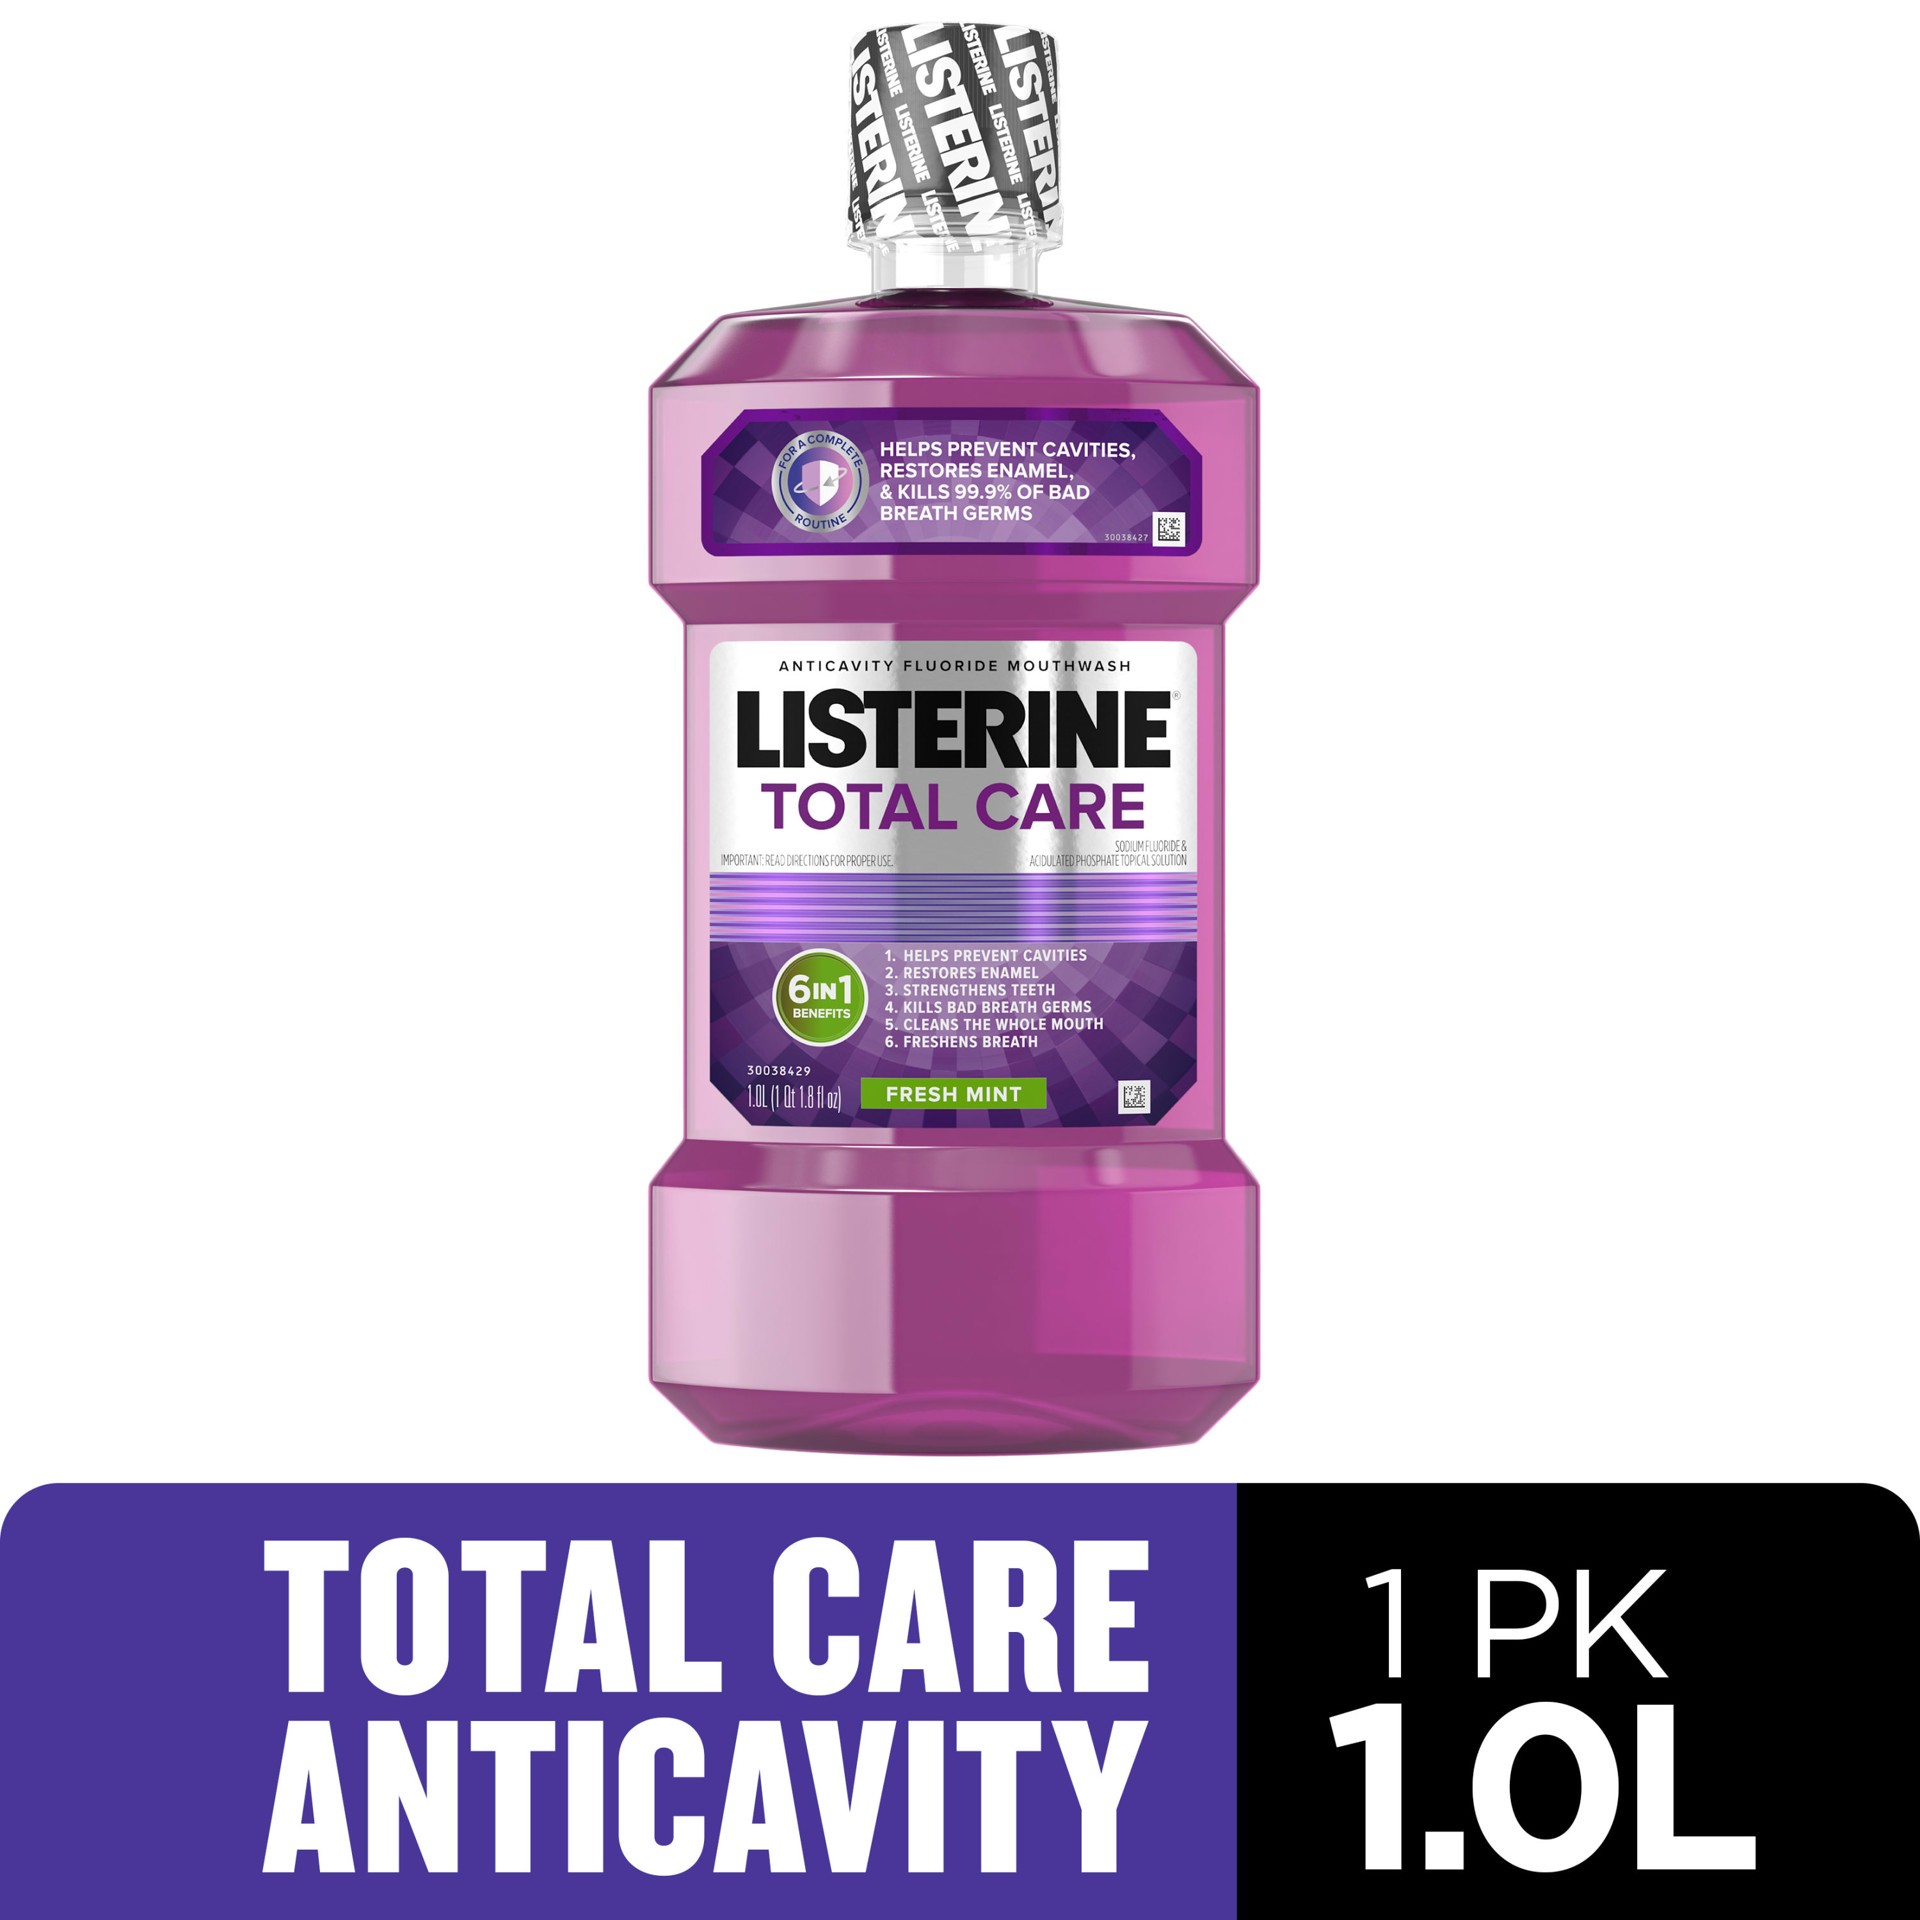 slide 1 of 6, Listerine Total Care Anticavity Fluoride Mouthwash, 6 Benefits in 1 Oral Rinse Helps Kill 99% of Bad Breath Germs, Prevents Cavities, Strengthens Teeth, ADA-Accepted, Fresh Mint, 1 liter